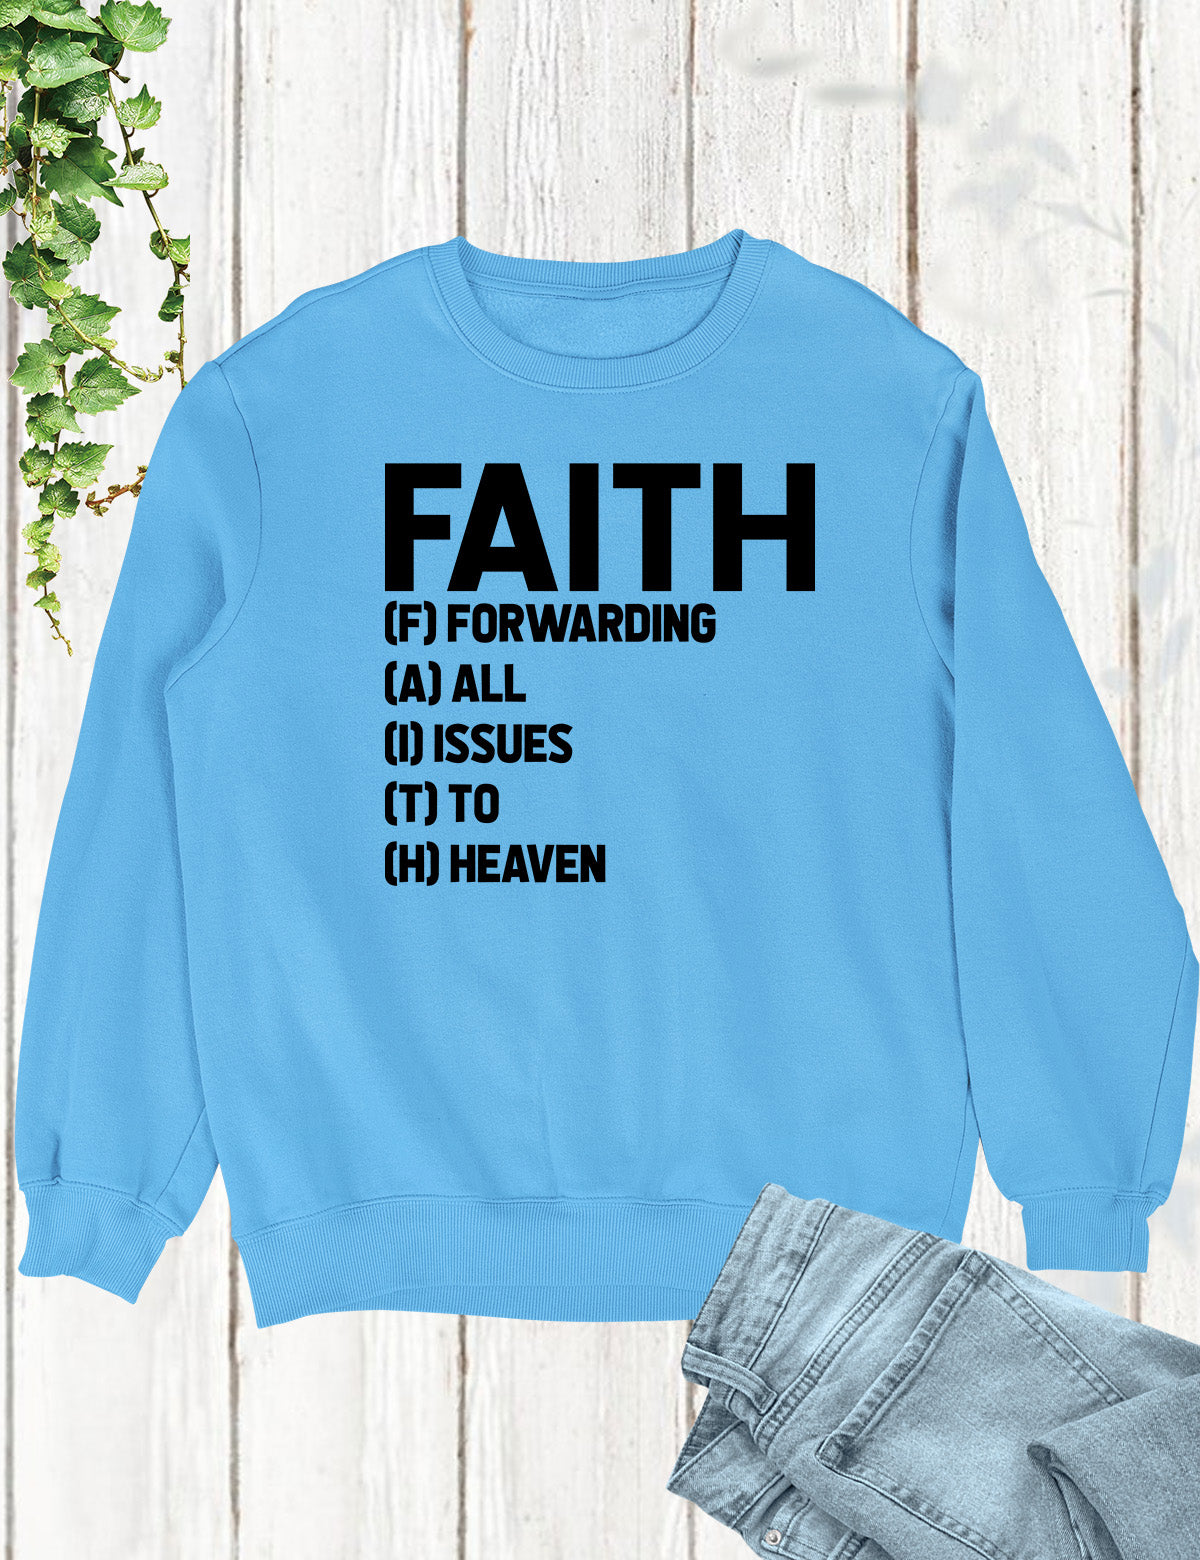 Faith Meaning Sweatshirt Forwarding All Issues To Heaven Tee